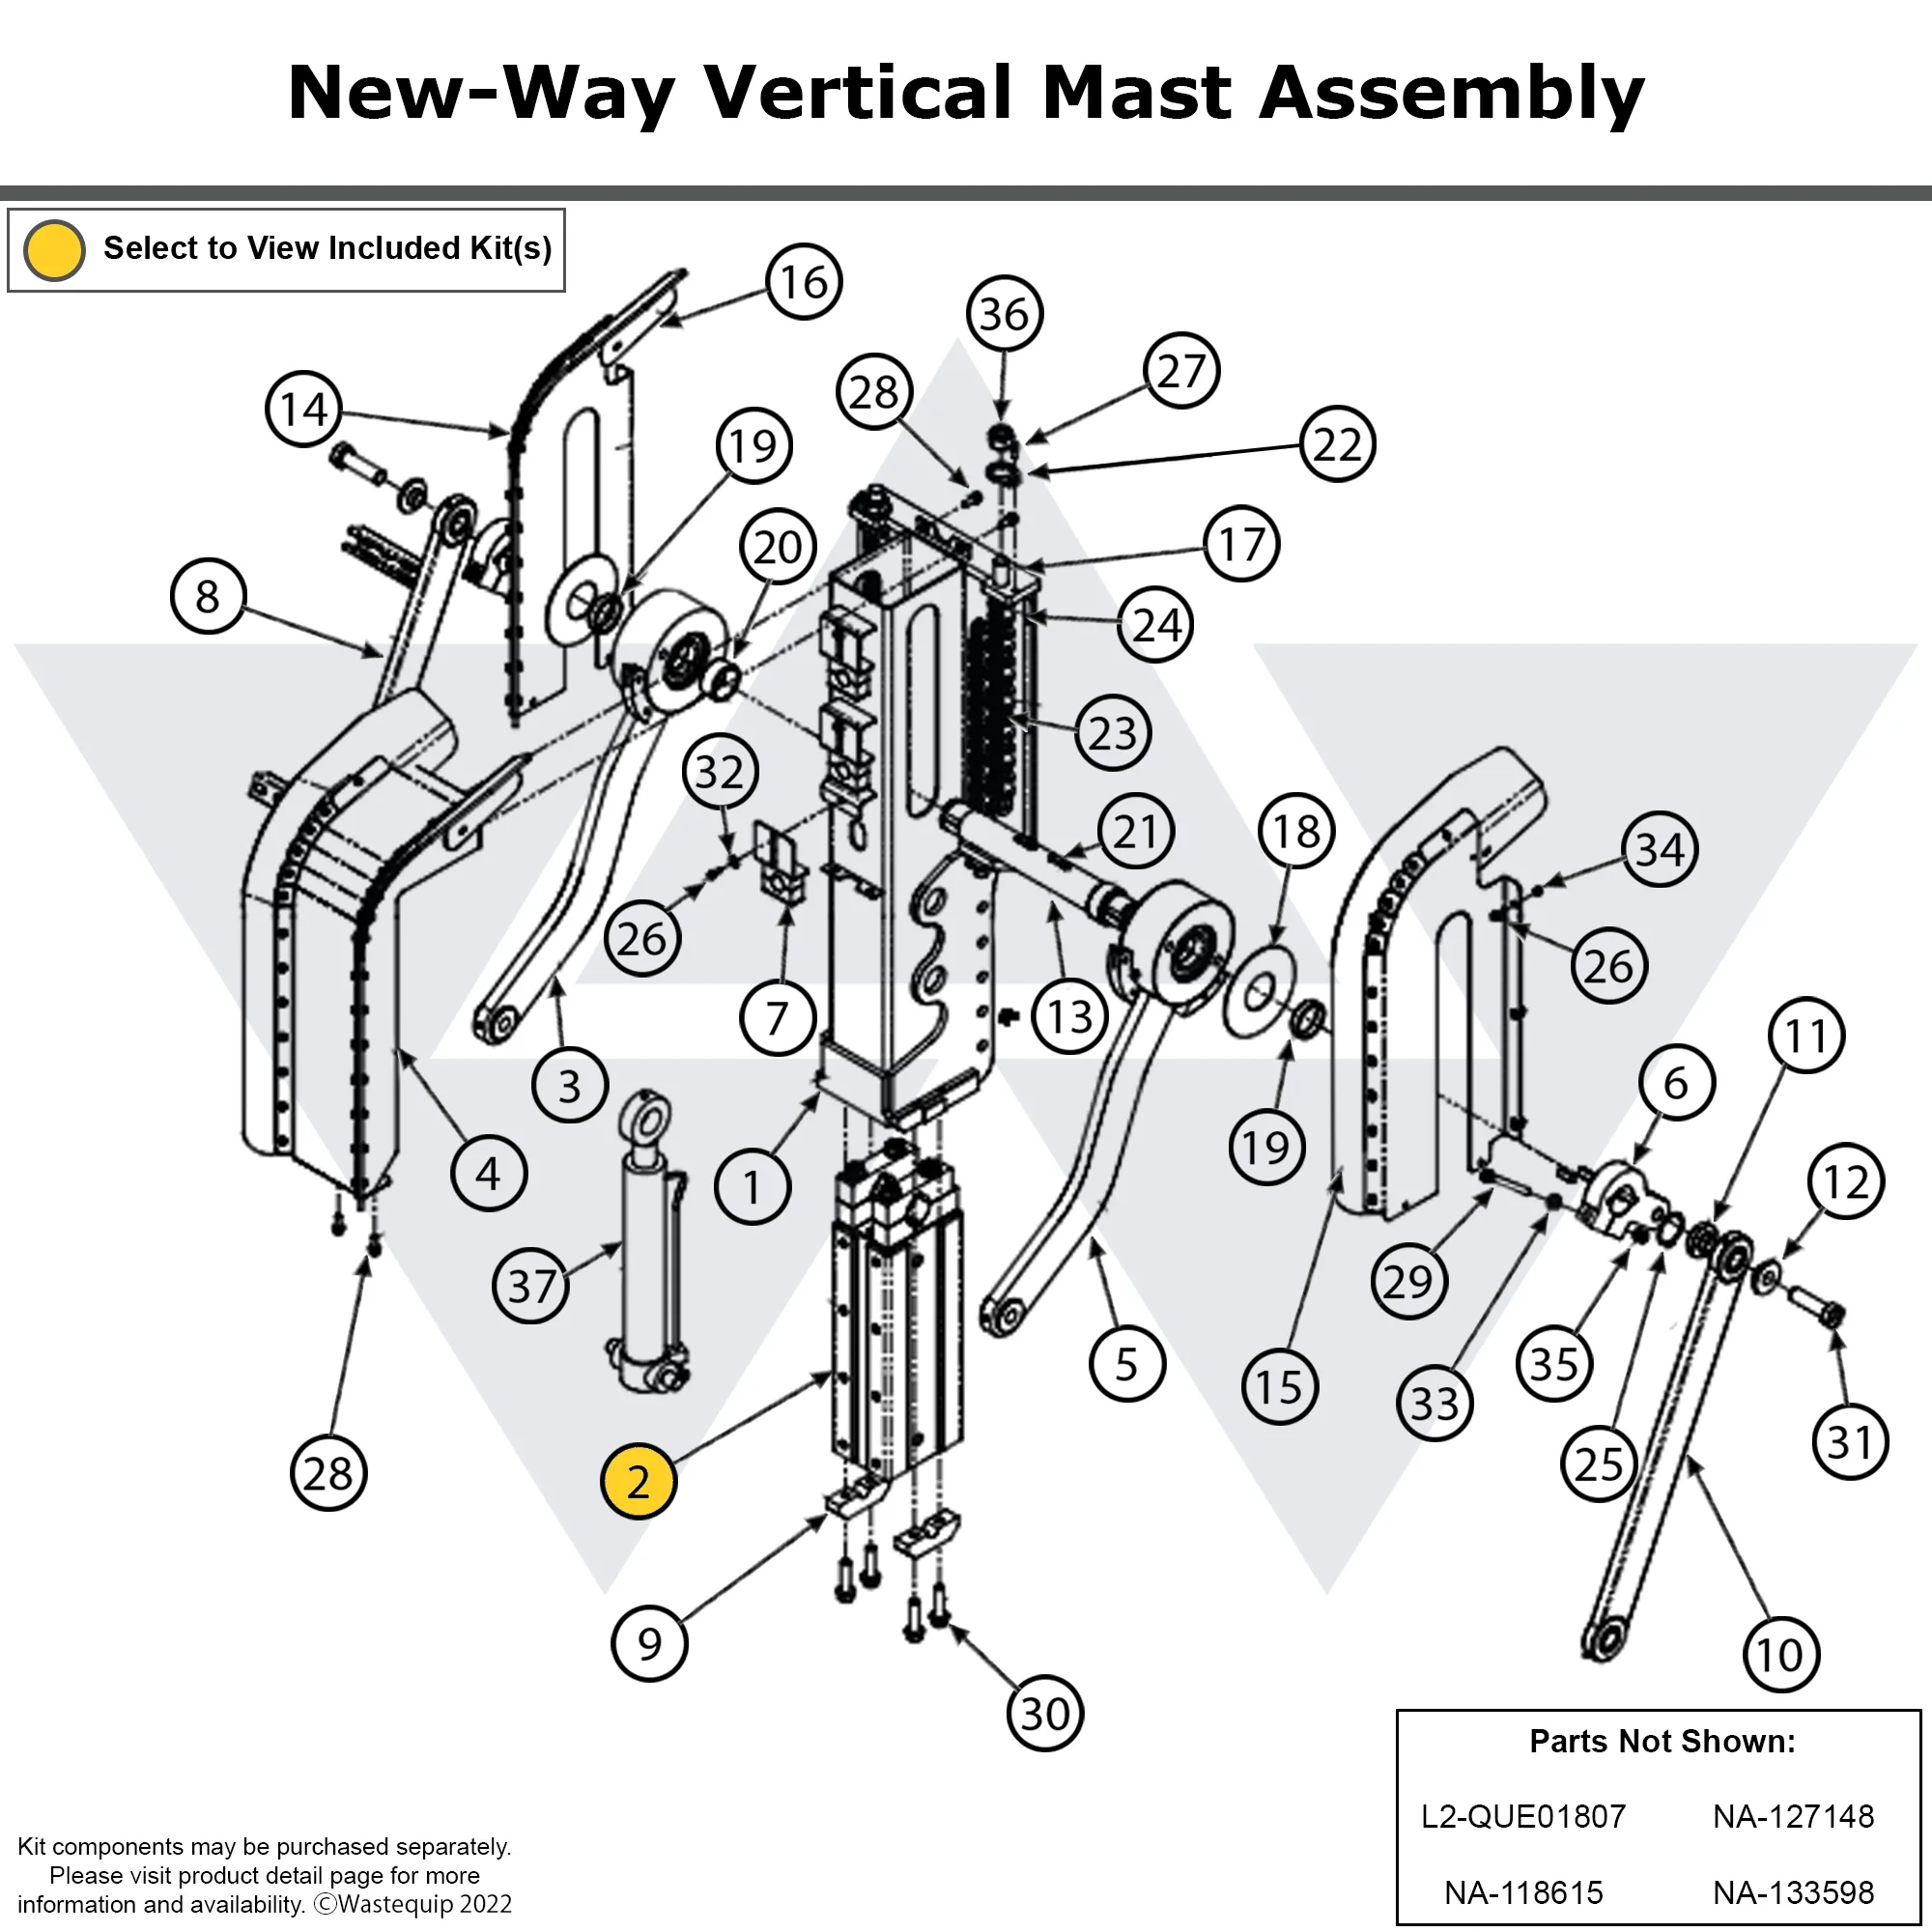 Wastebuilt® Replacement for New Way Vertical Mast Assembly